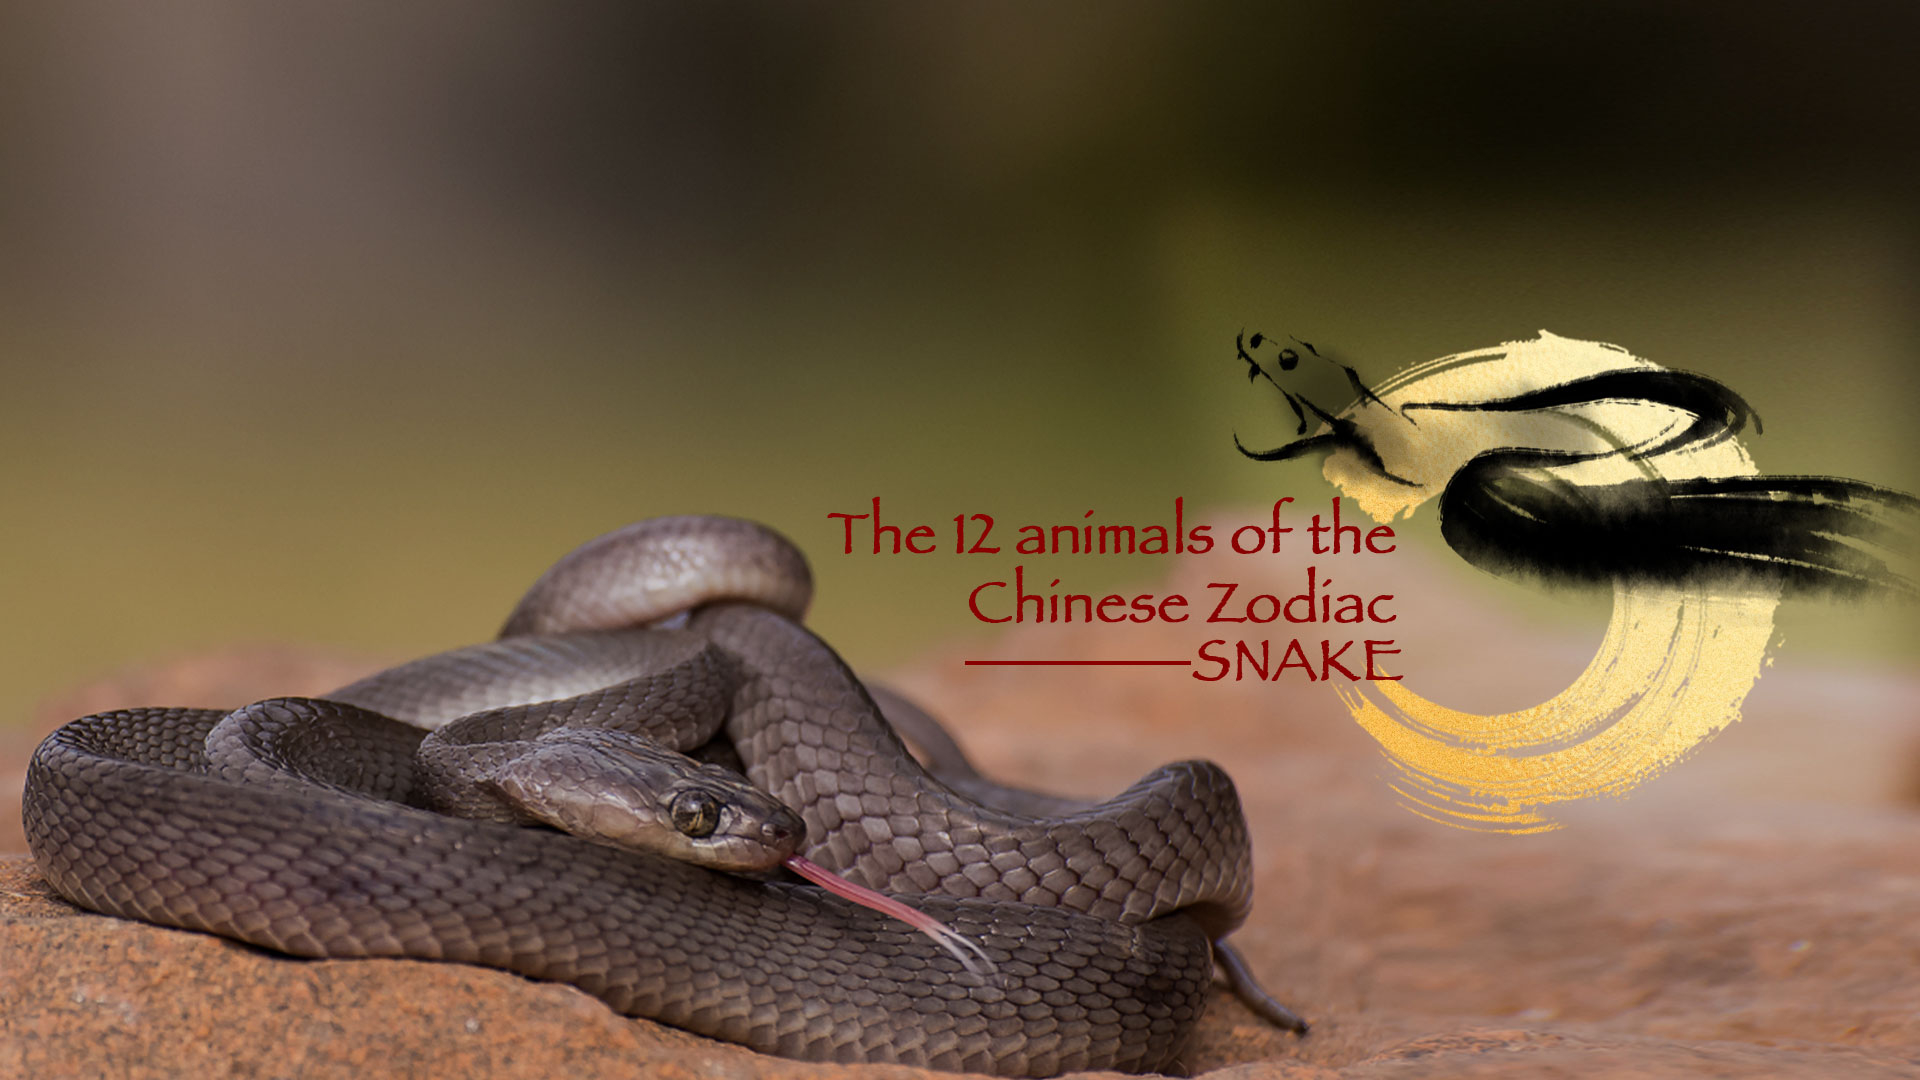 The 12 animals of the Chinese Zodiac: Snake CGTN